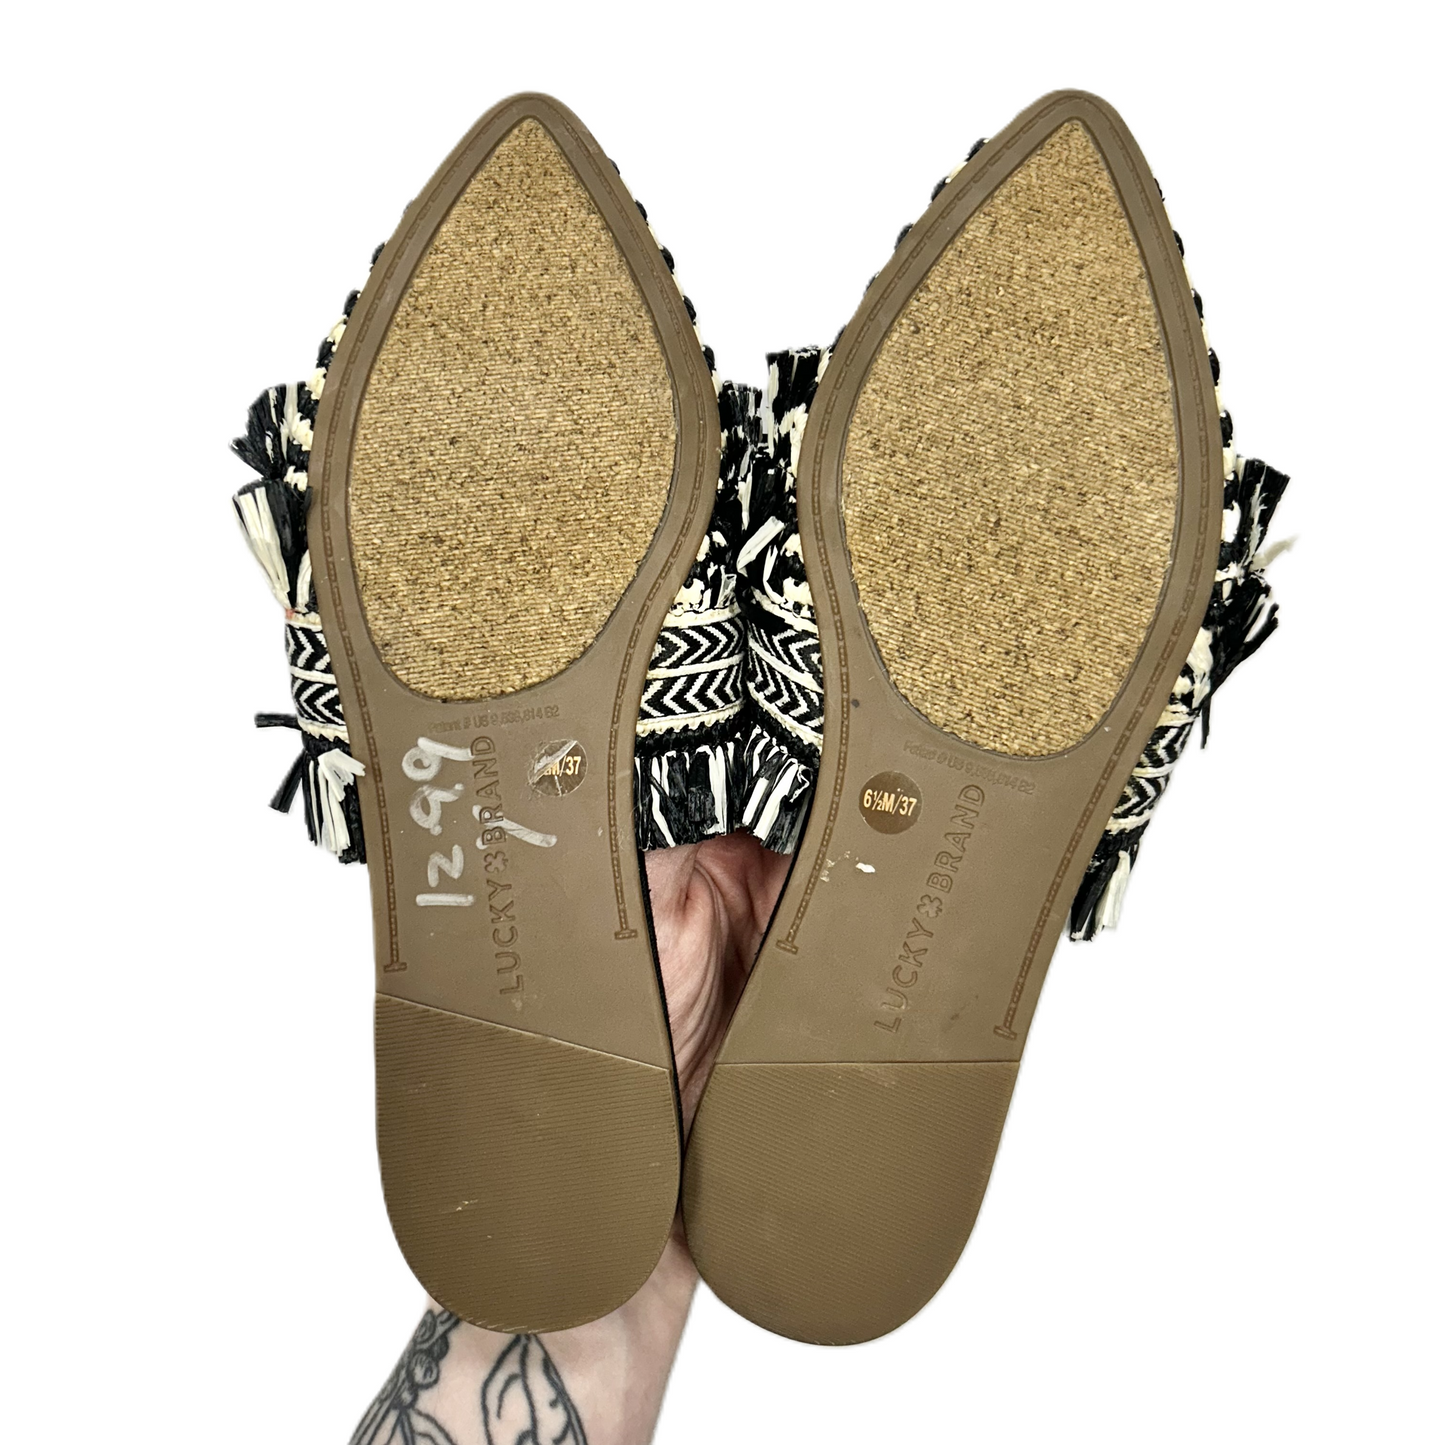 Black & Cream Shoes Flats By Lucky Brand, Size: 7.5